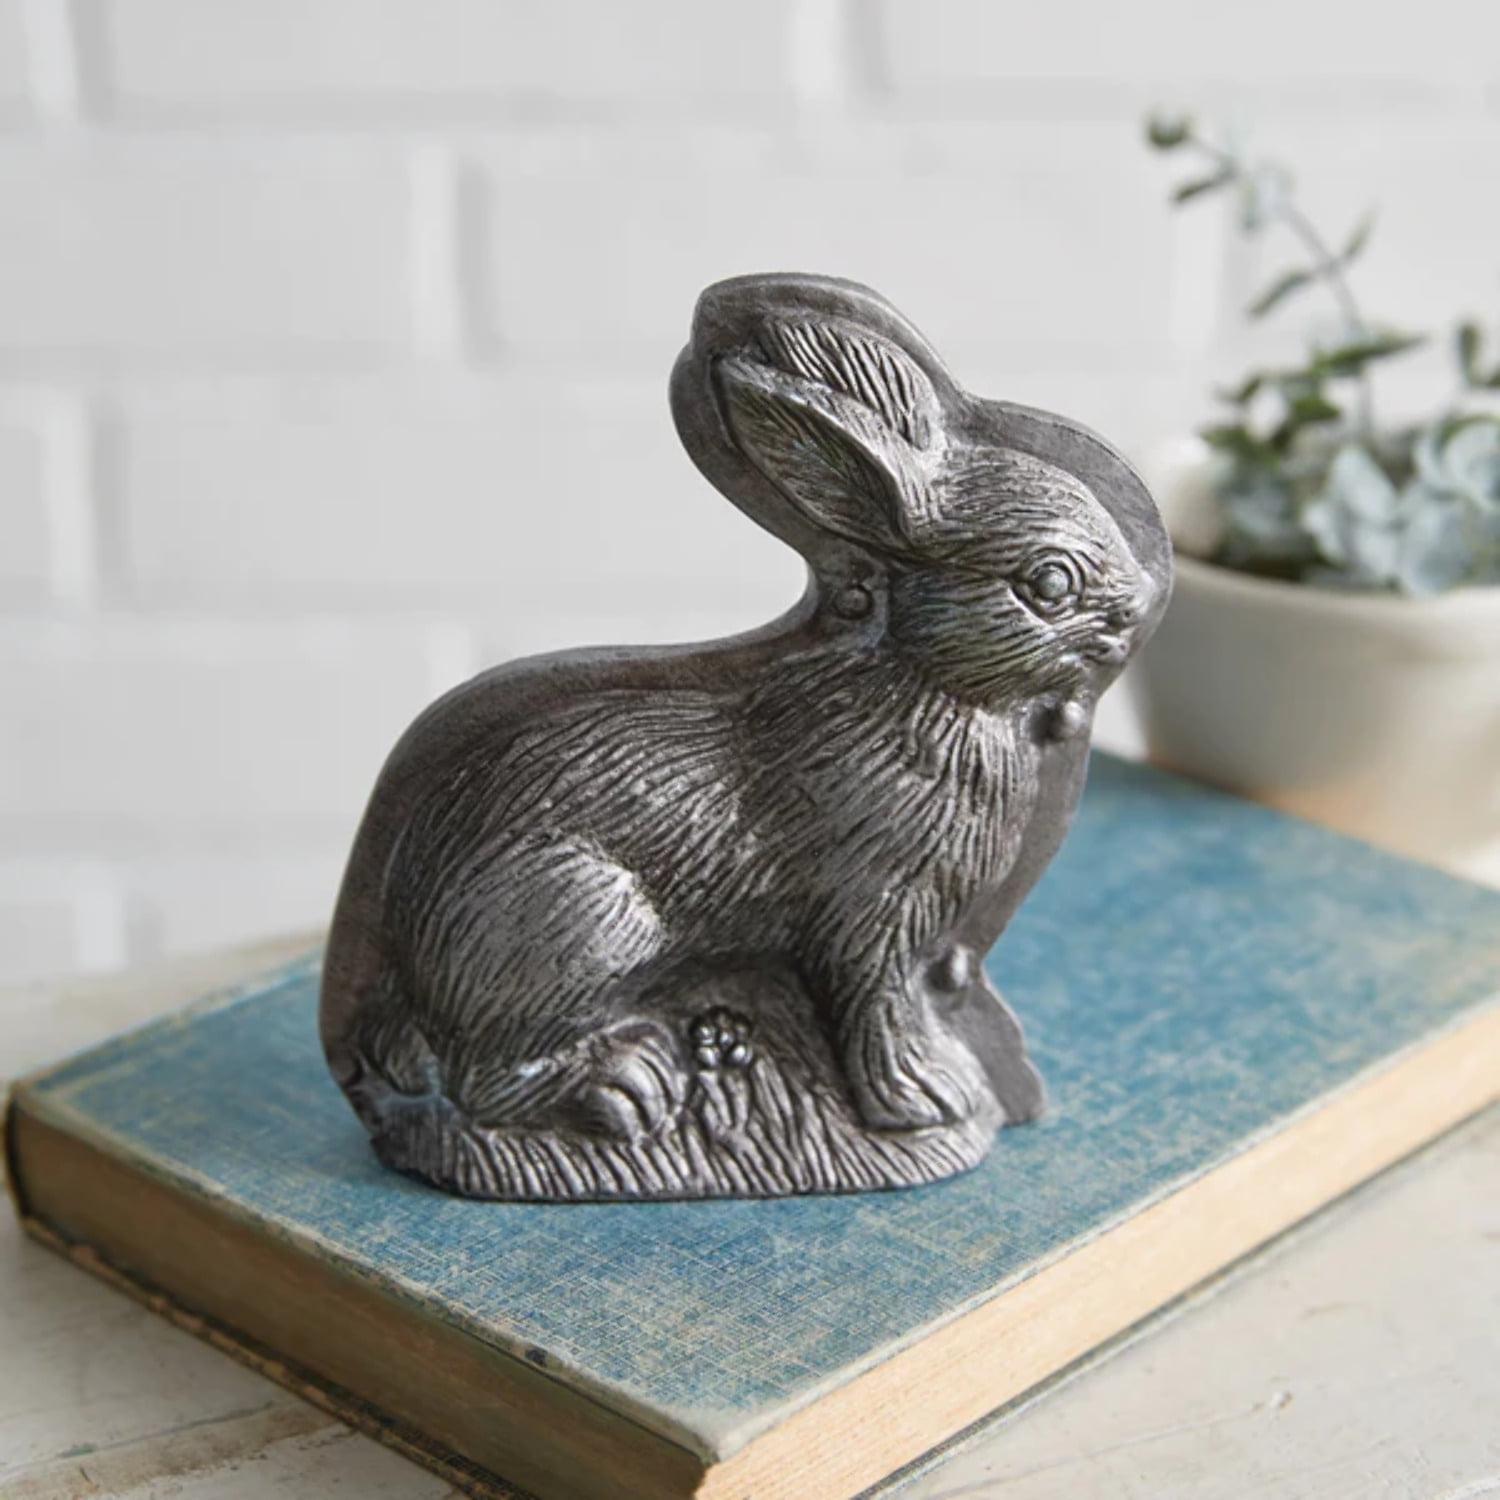 CTW Home 370843 5 in. Vintage Inspired Chocolate Mold Bunny Figurine, Silver